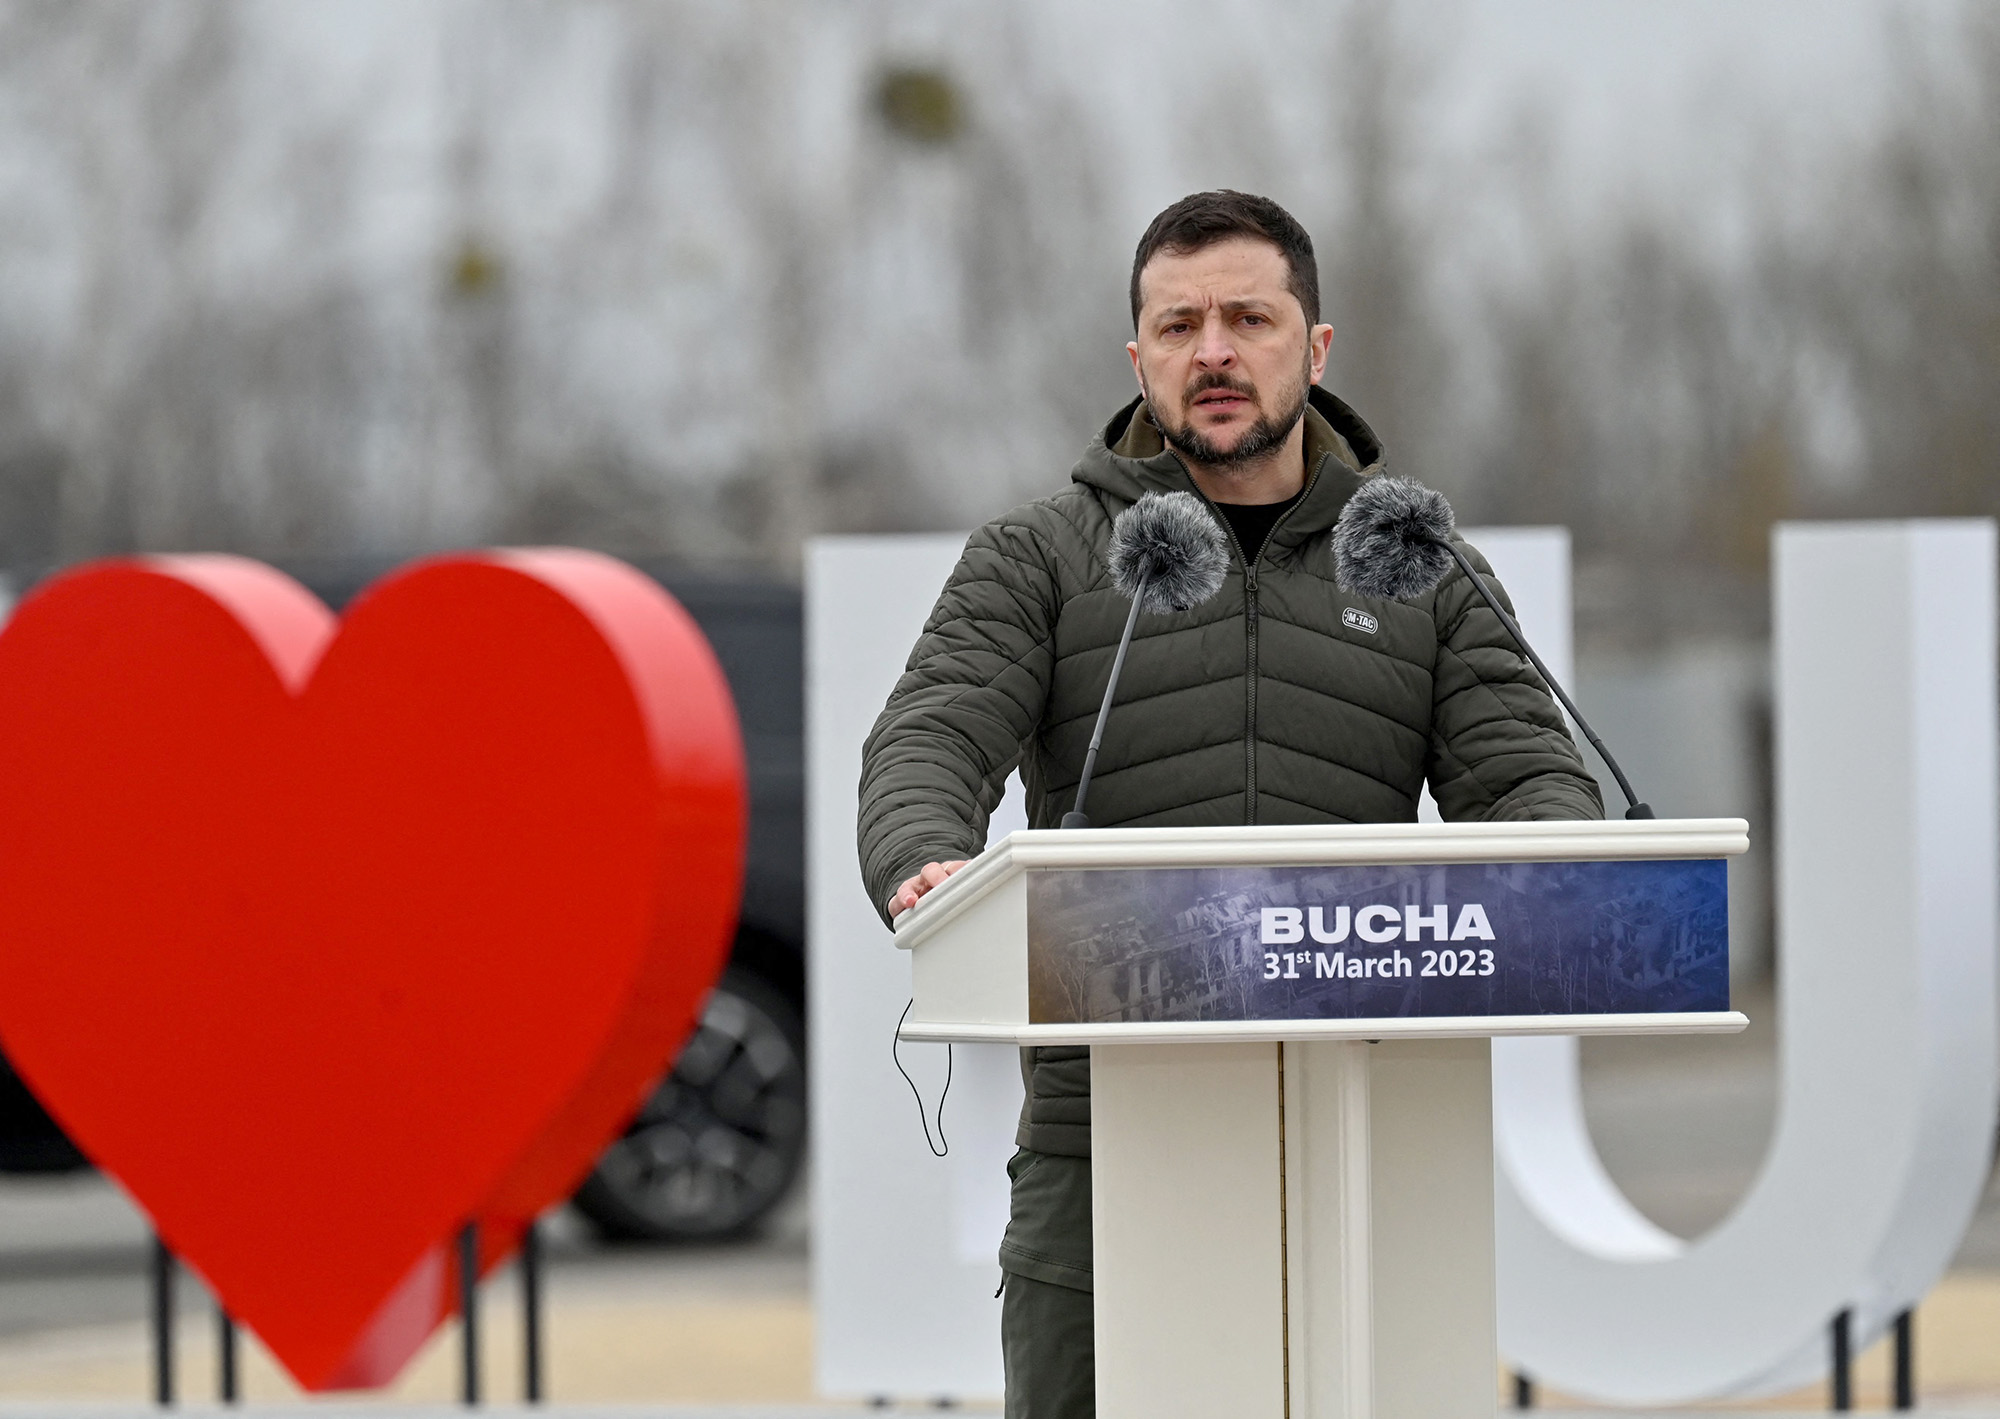 Ukrainian President Volodymyr Zelensky attends a ceremony marking the first anniversary of the retreat of Russian troops from the Ukrainian town of Bucha, near Kyiv in Ukraine, on March 31.